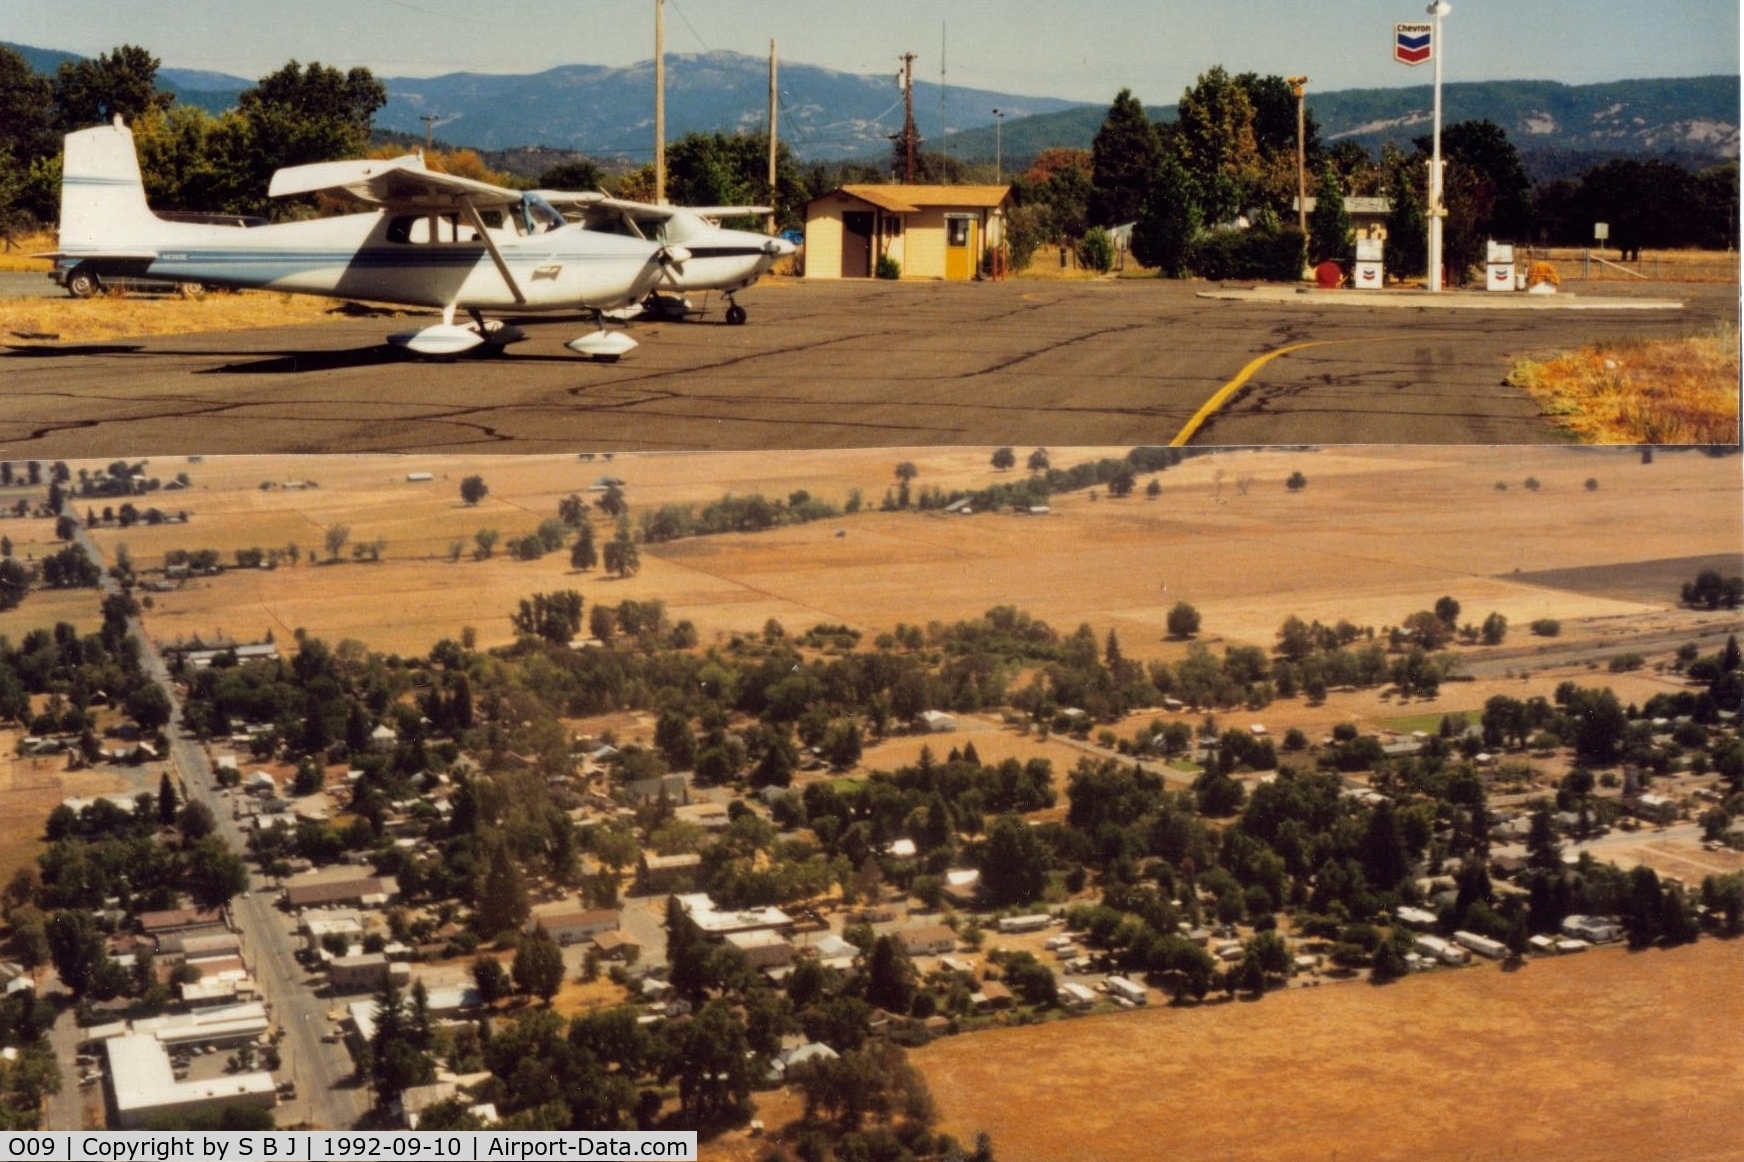 Round Valley Airport (O09) - The Round Valley airport ramp and air view of the small town of Covelo which is a short distance away.This was in 1992.The ramp view is looking toward town or east and town view is to the north.